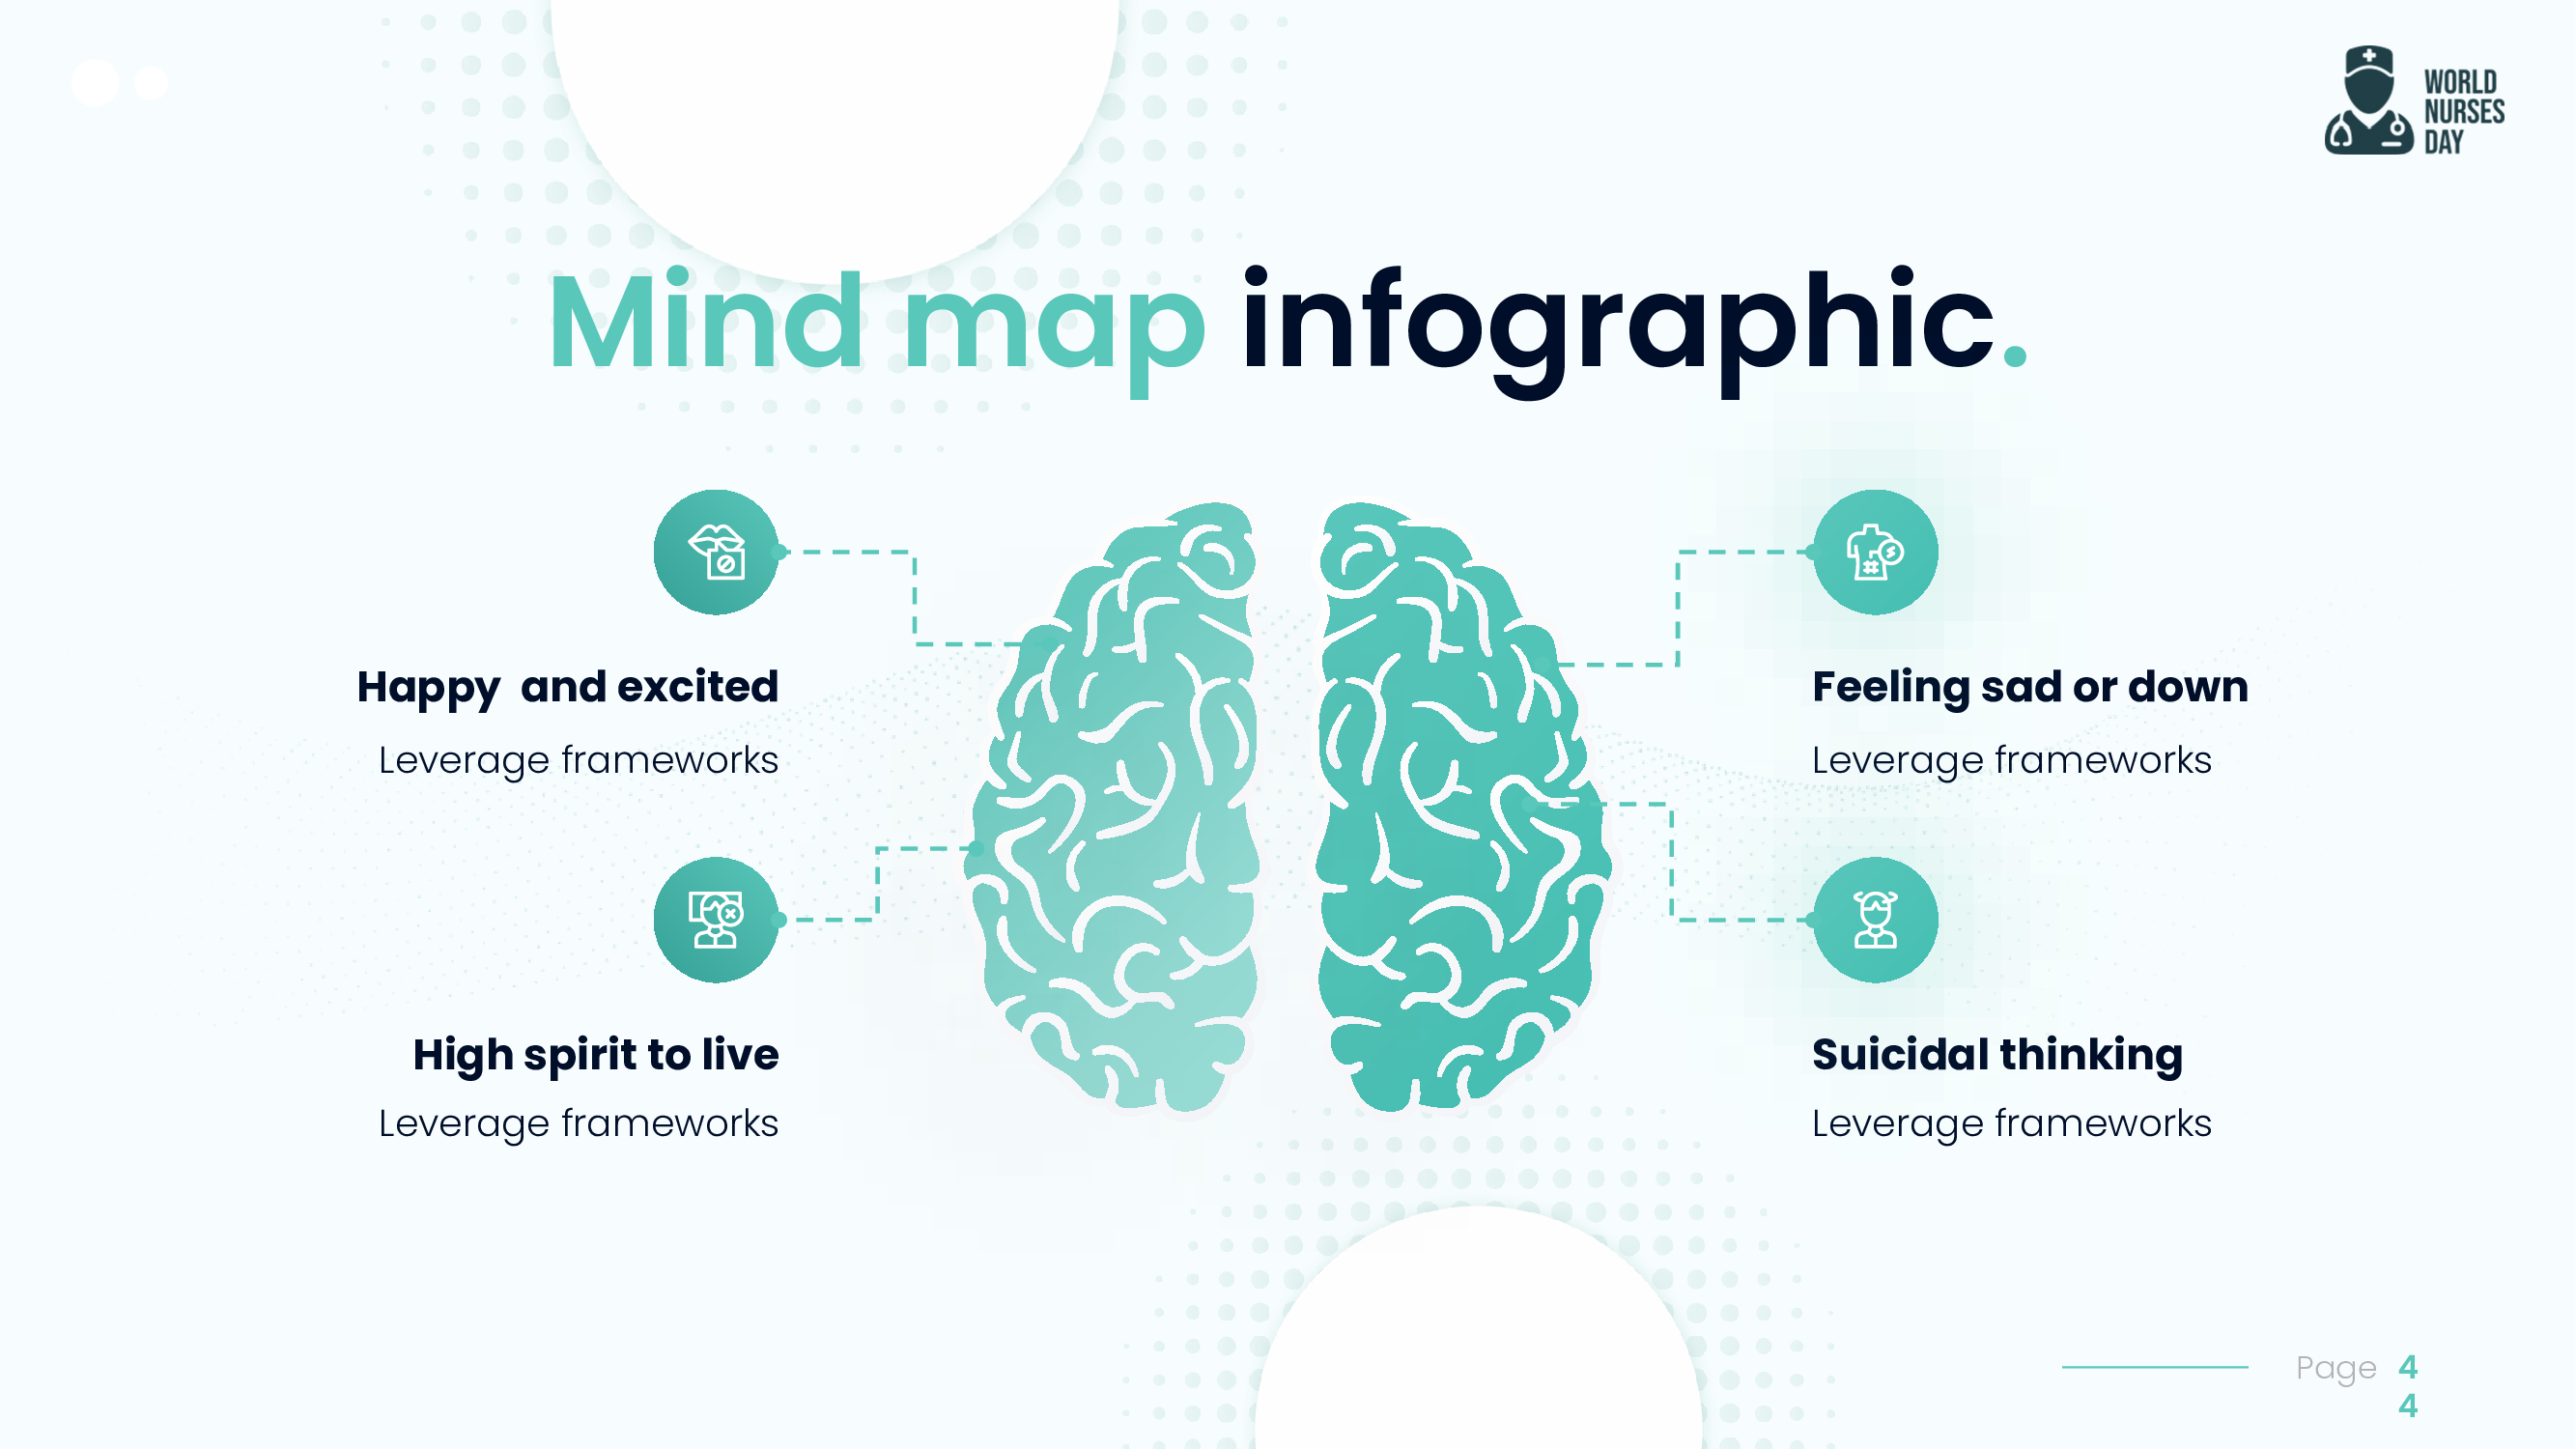 Create mind map infographic.